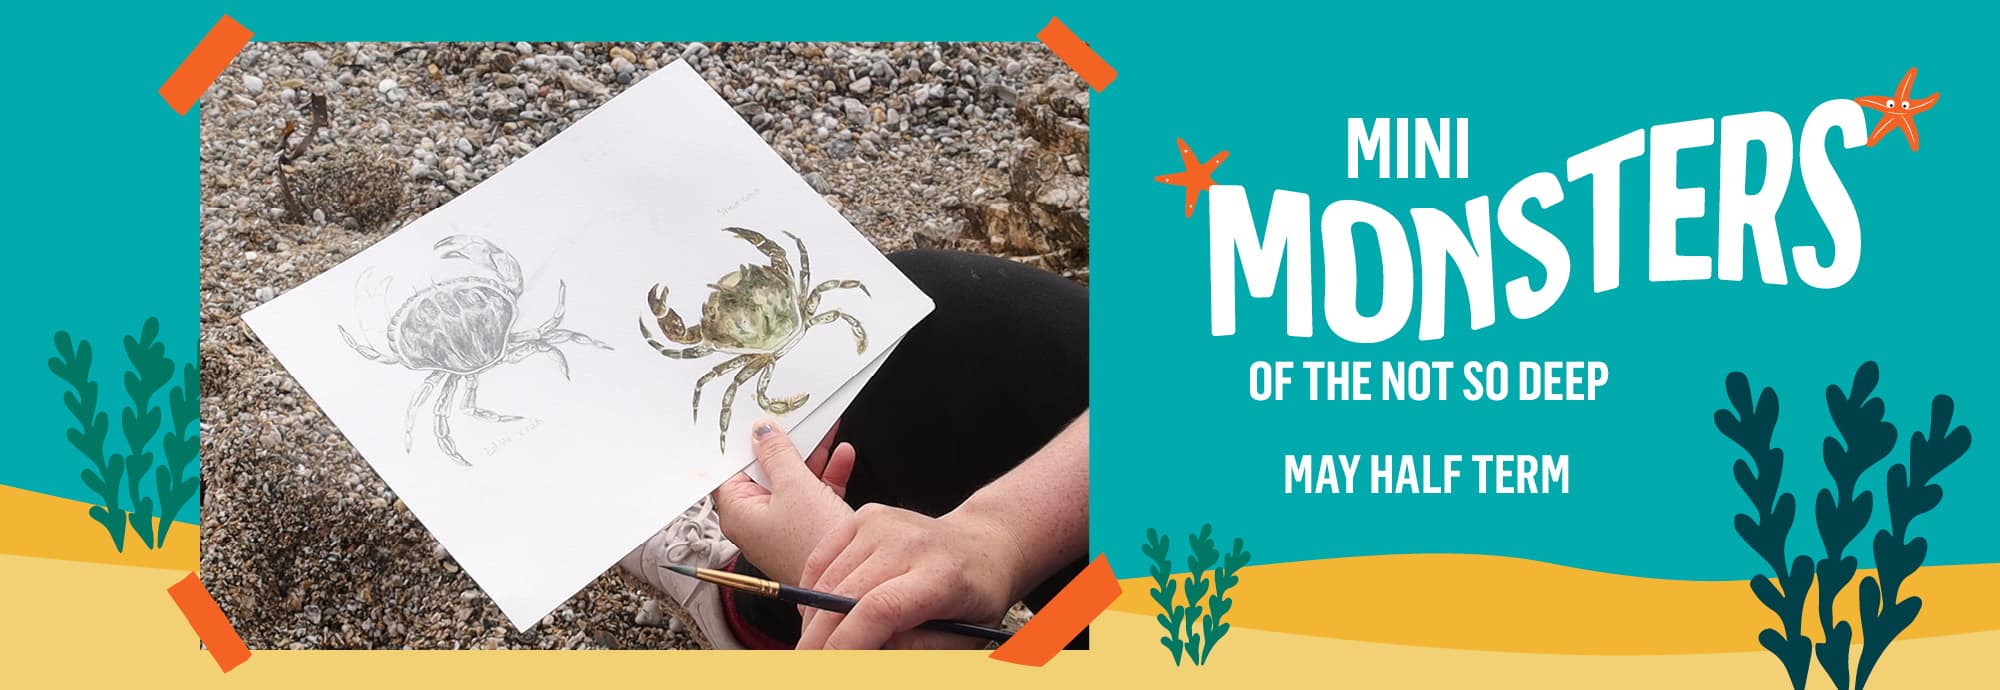 On the right, white text against a blue-green background reads 'Mini Monsters of the Not So Deep' and 'May half term'. On the left is a photo of someone in the process of painting and drawing two crabs.